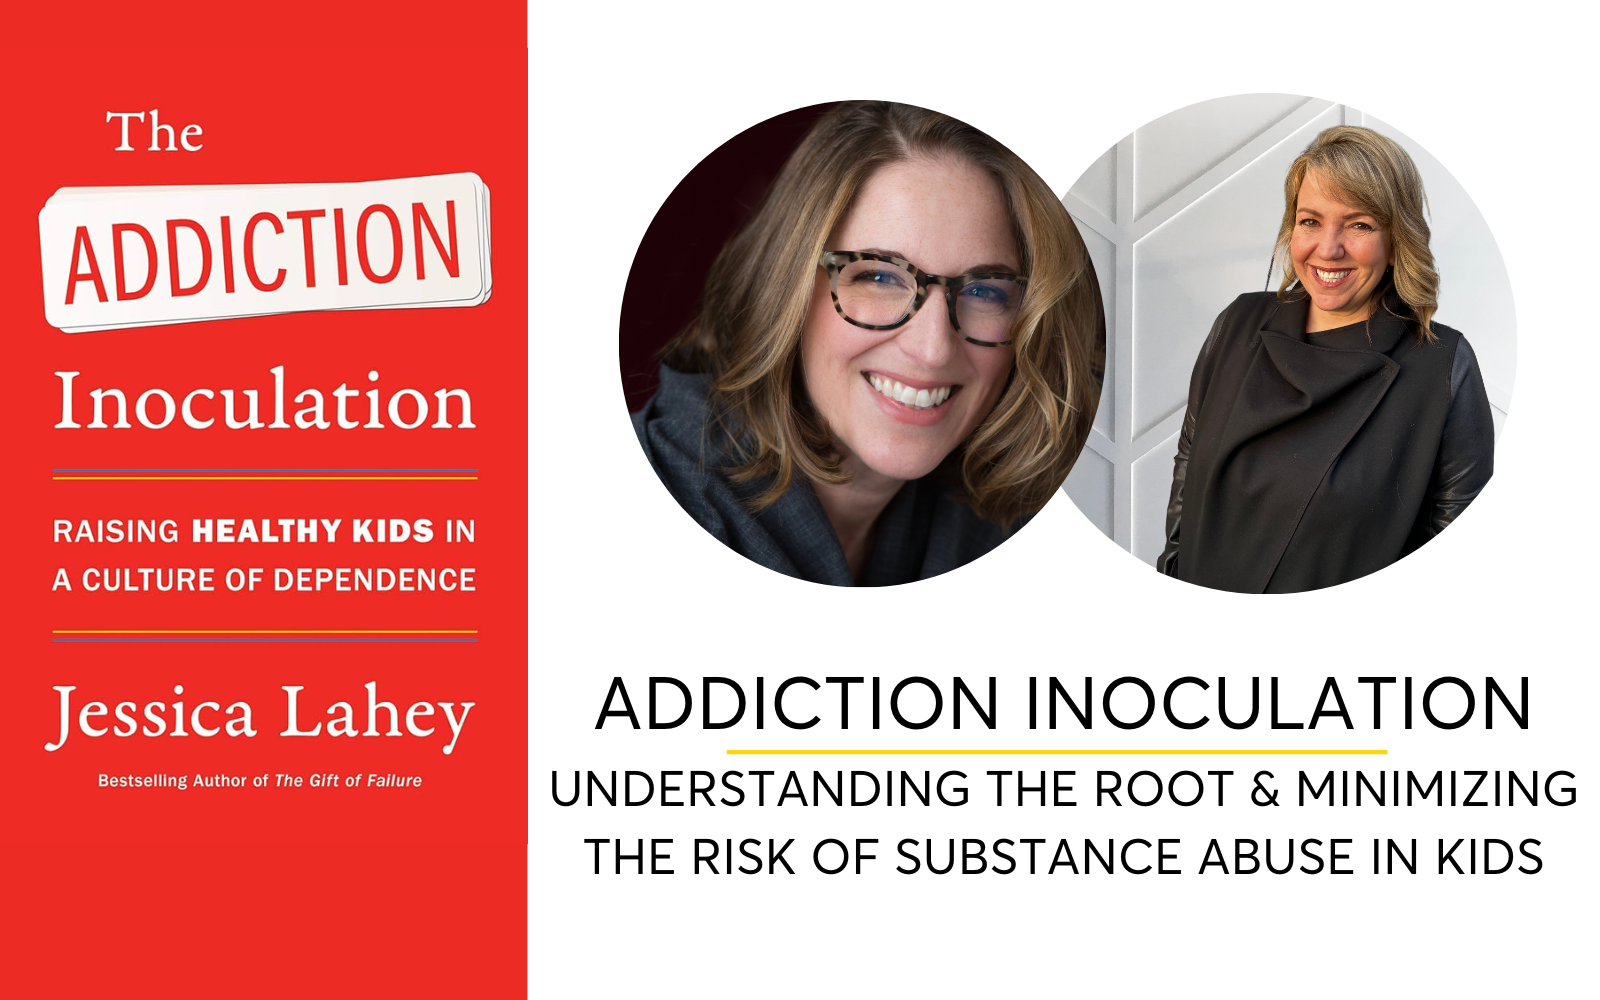 Addiction Inoculation: How To Minimize Your Kids’ Risk Of Substance Abuse And Dependence